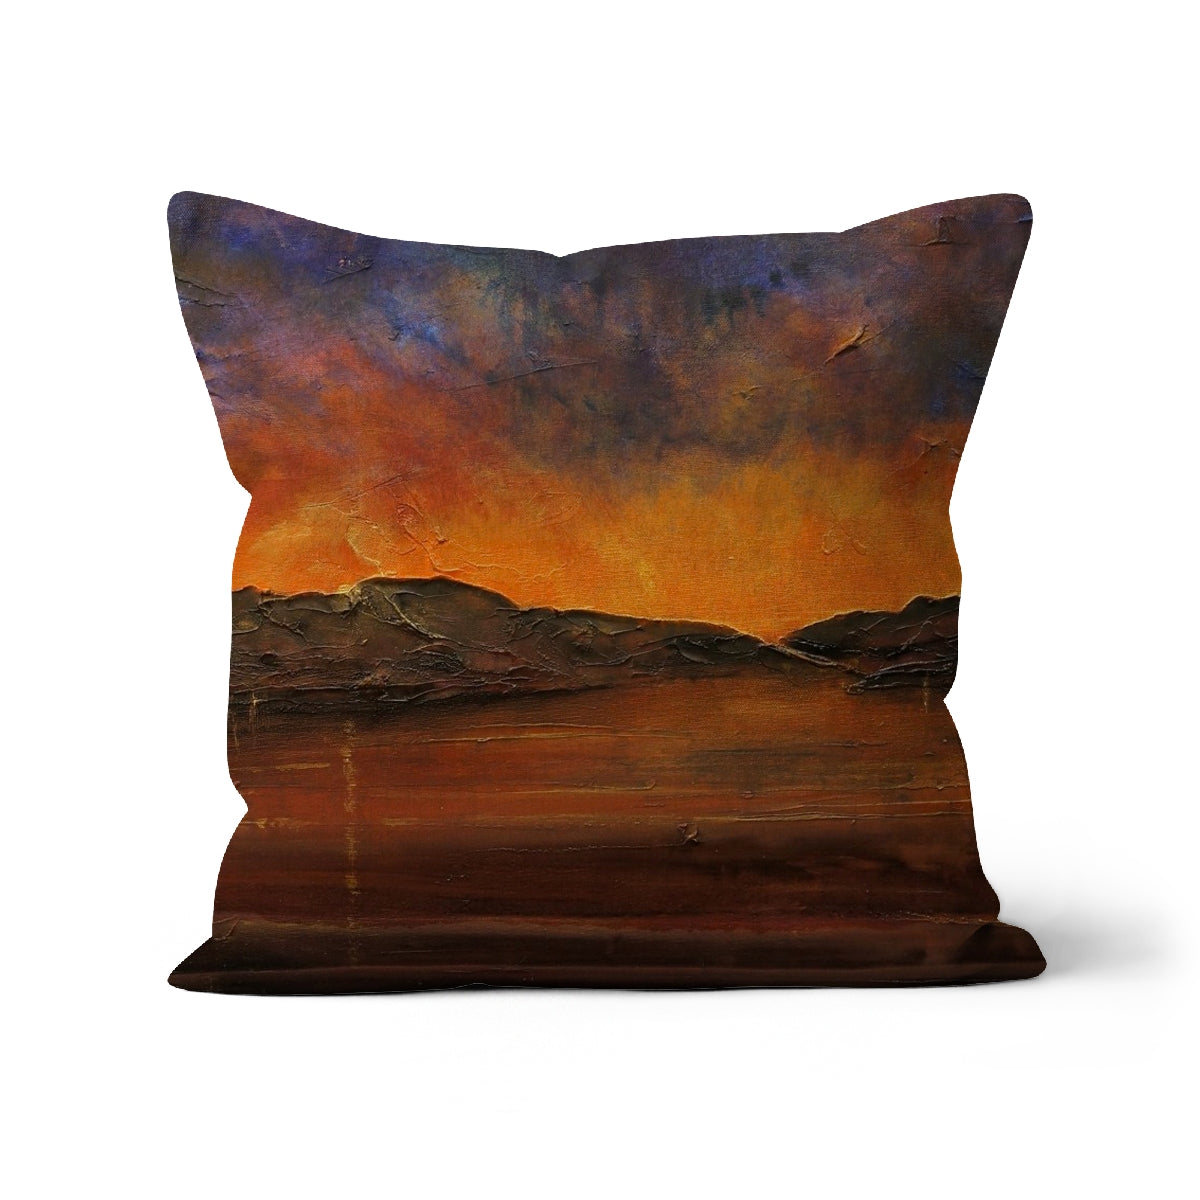 A Brooding Clyde Dusk Art Gifts Cushion-Cushions-River Clyde Art Gallery-Canvas-16"x16"-Paintings, Prints, Homeware, Art Gifts From Scotland By Scottish Artist Kevin Hunter